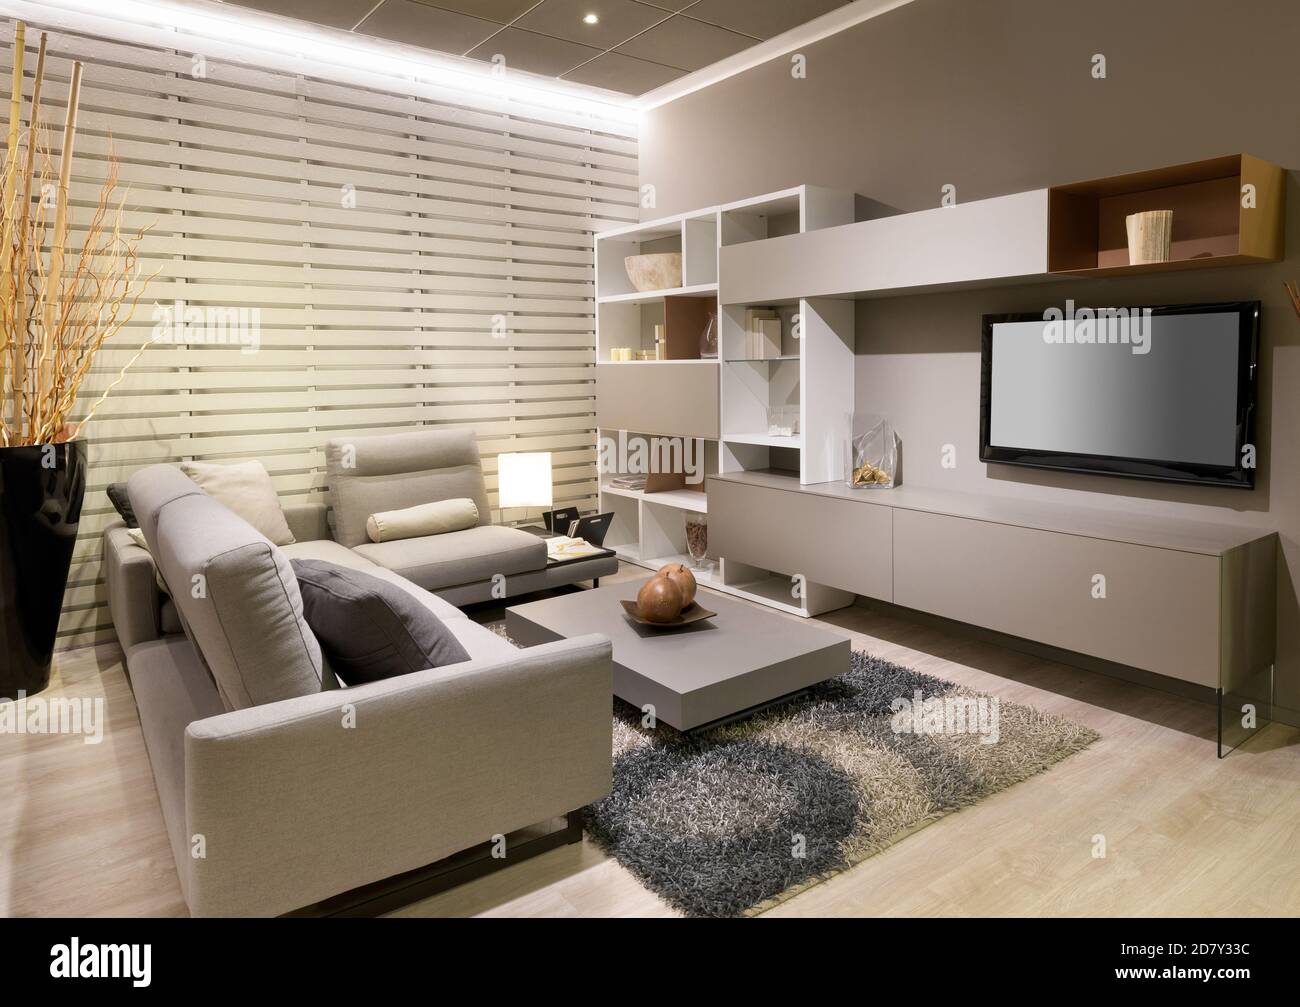 Modern minimalist living room or den interior with beige decor and ...